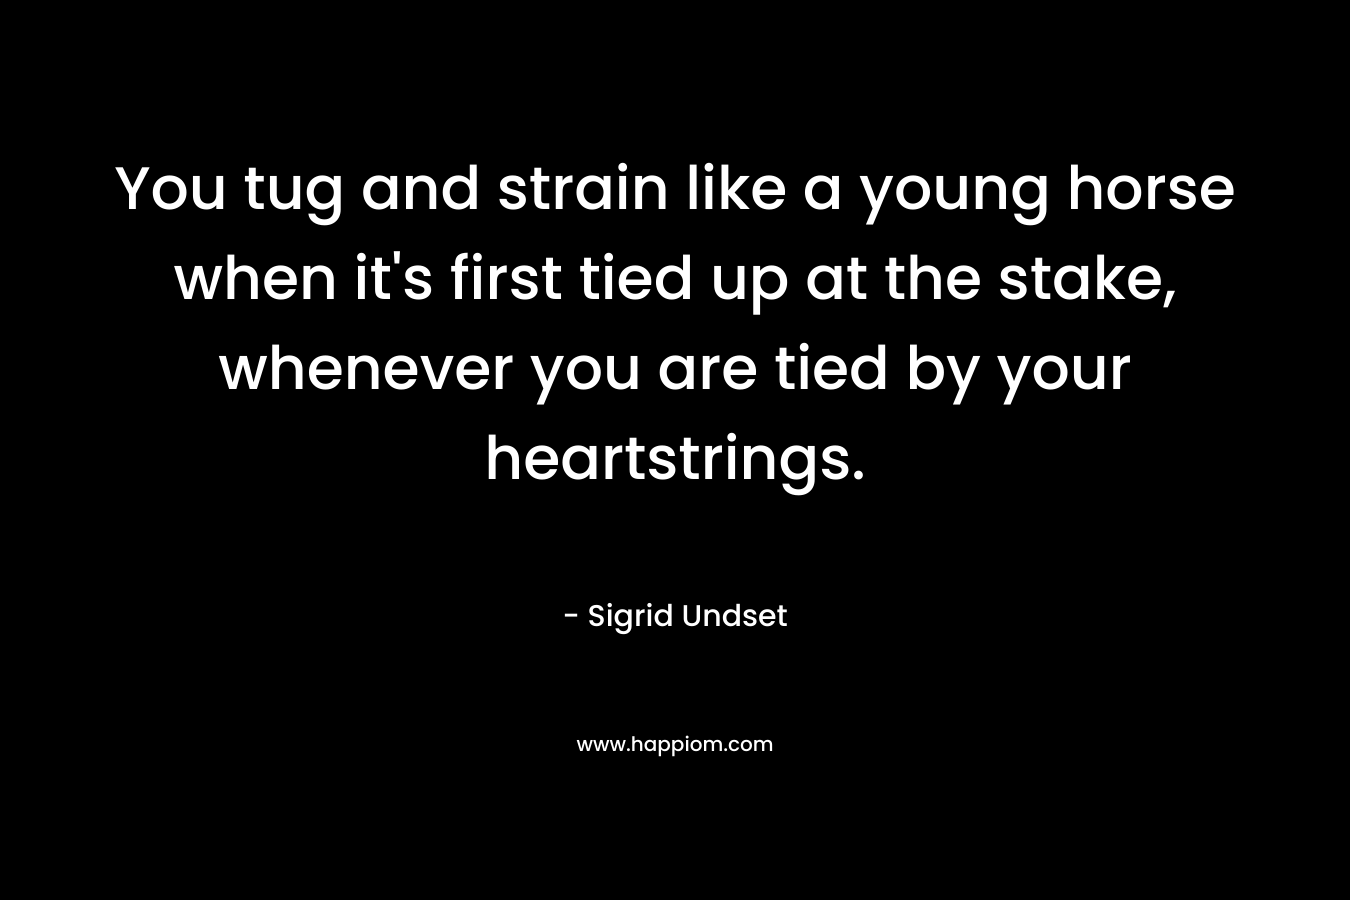 You tug and strain like a young horse when it’s first tied up at the stake, whenever you are tied by your heartstrings. – Sigrid Undset